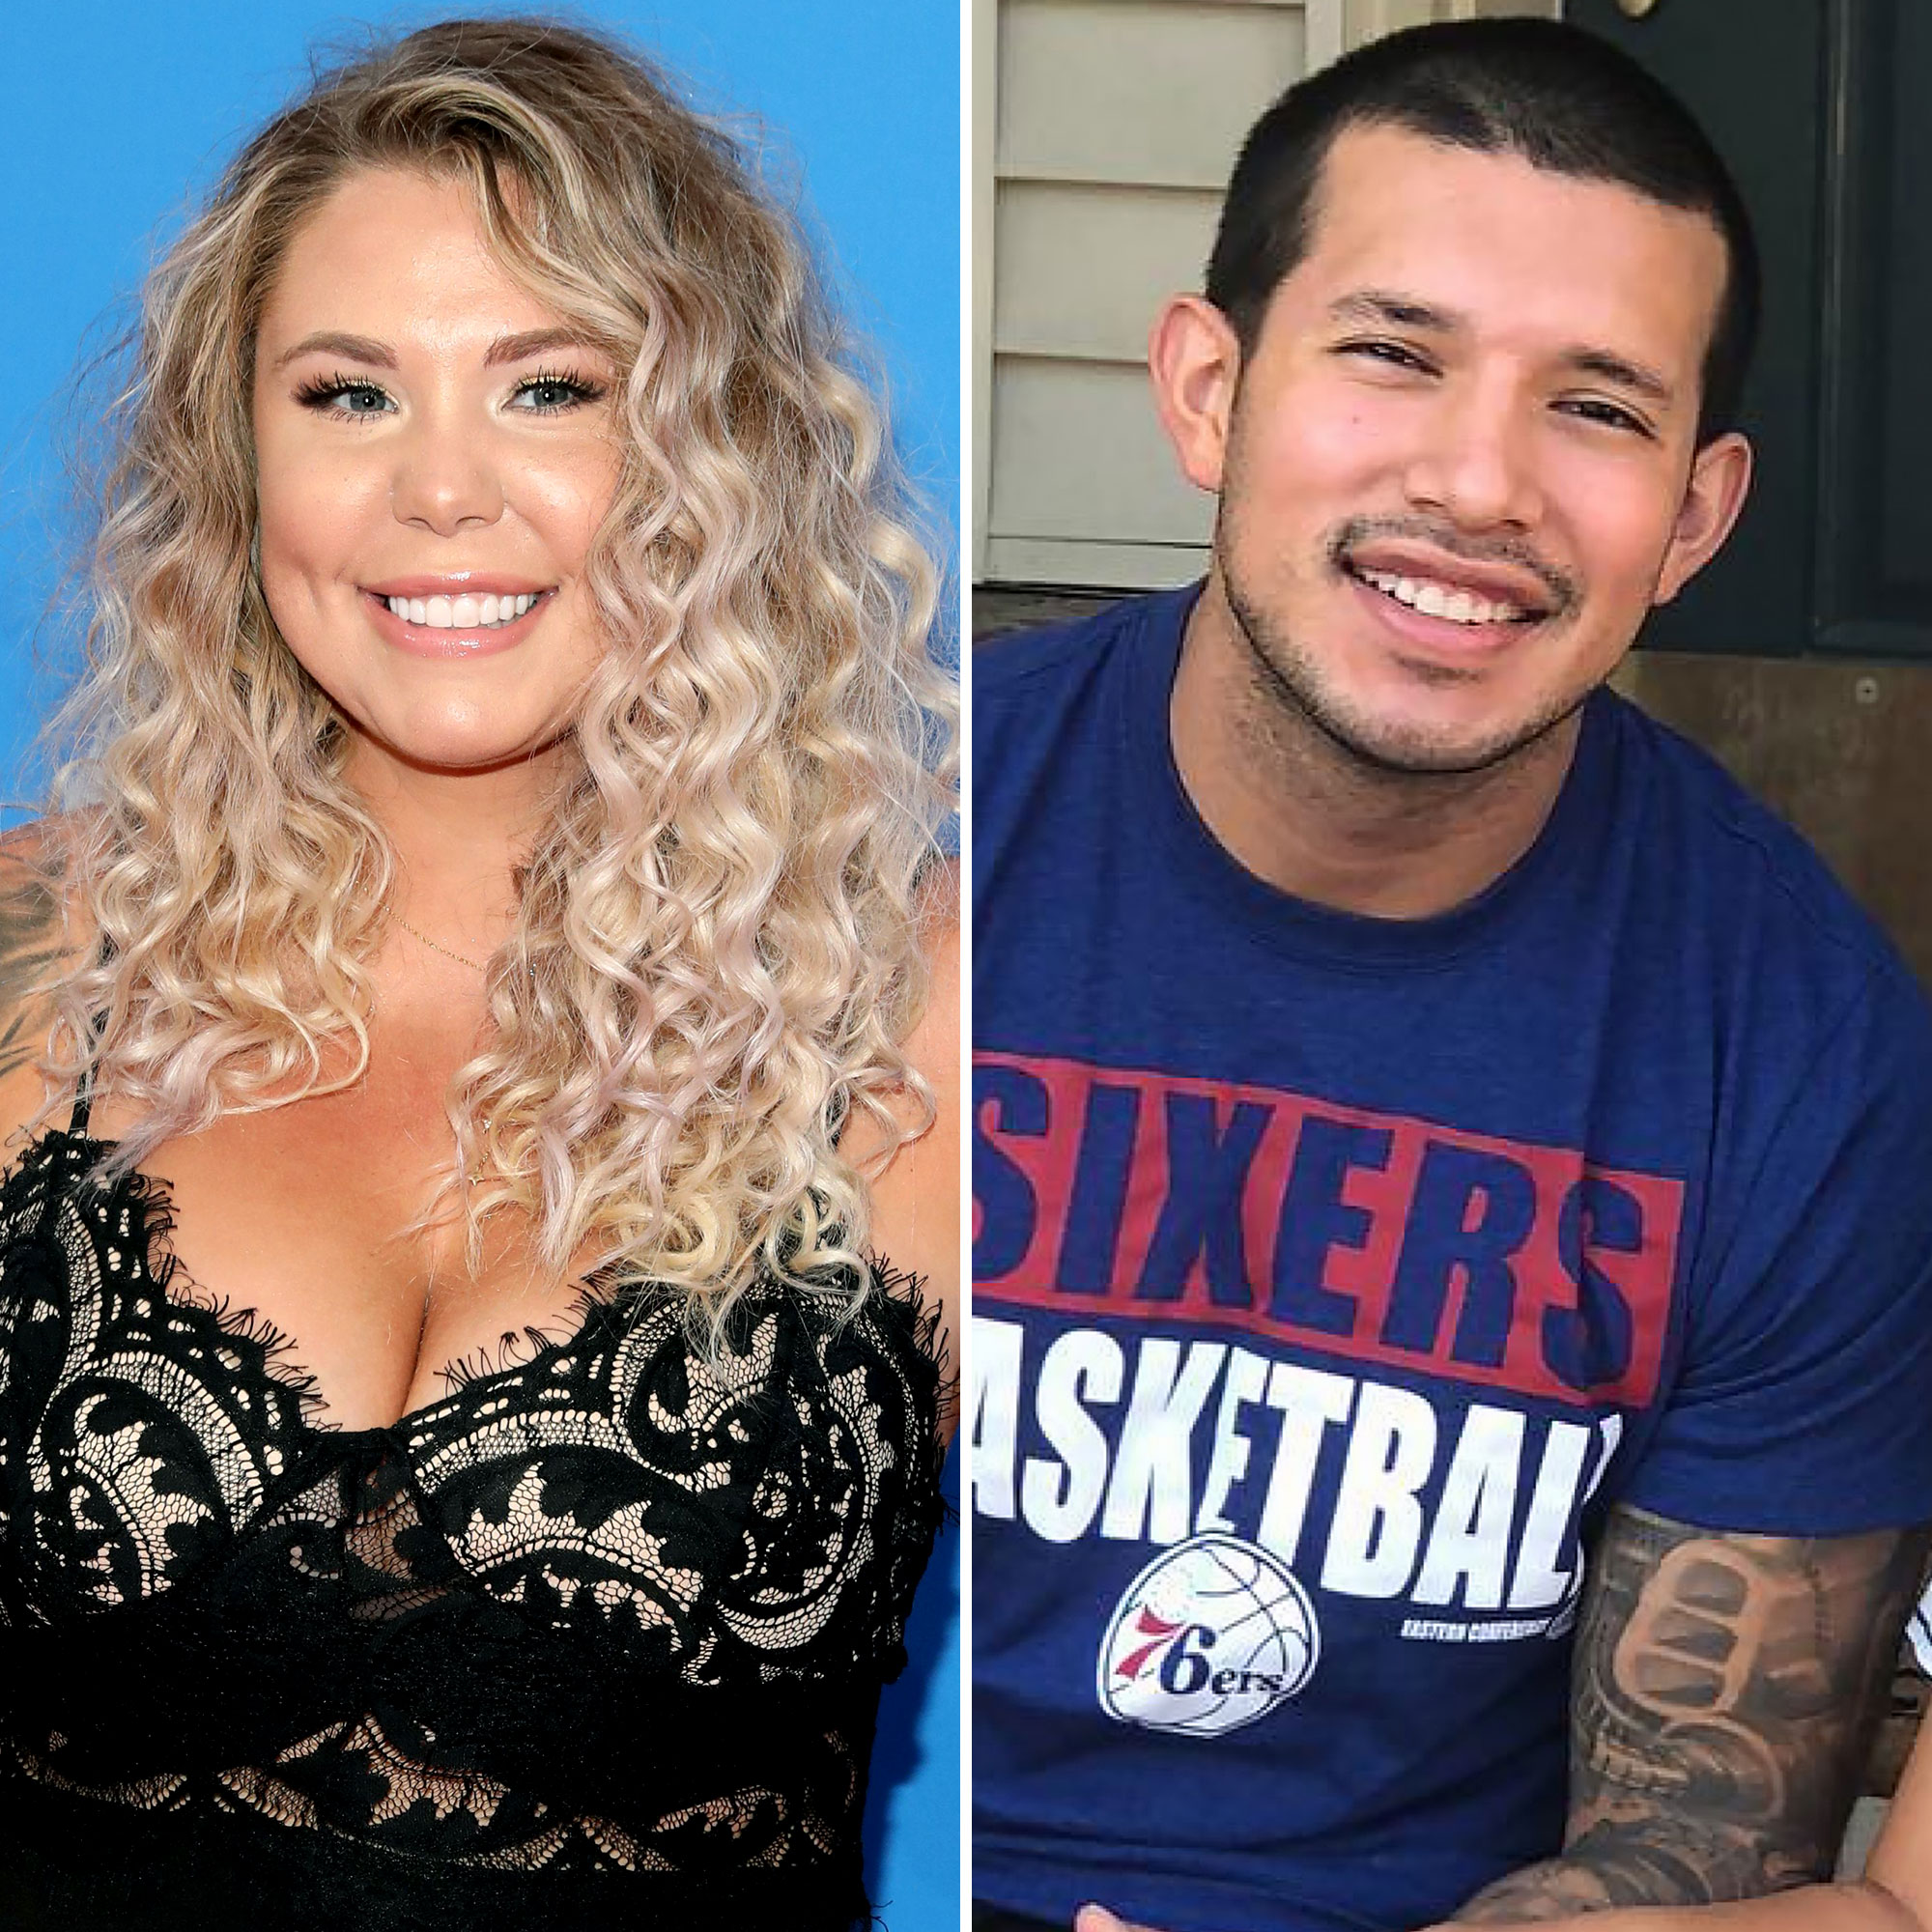 Where Teen Mom's Kailyn Lowry and Javi Marroquin Romantically Stand